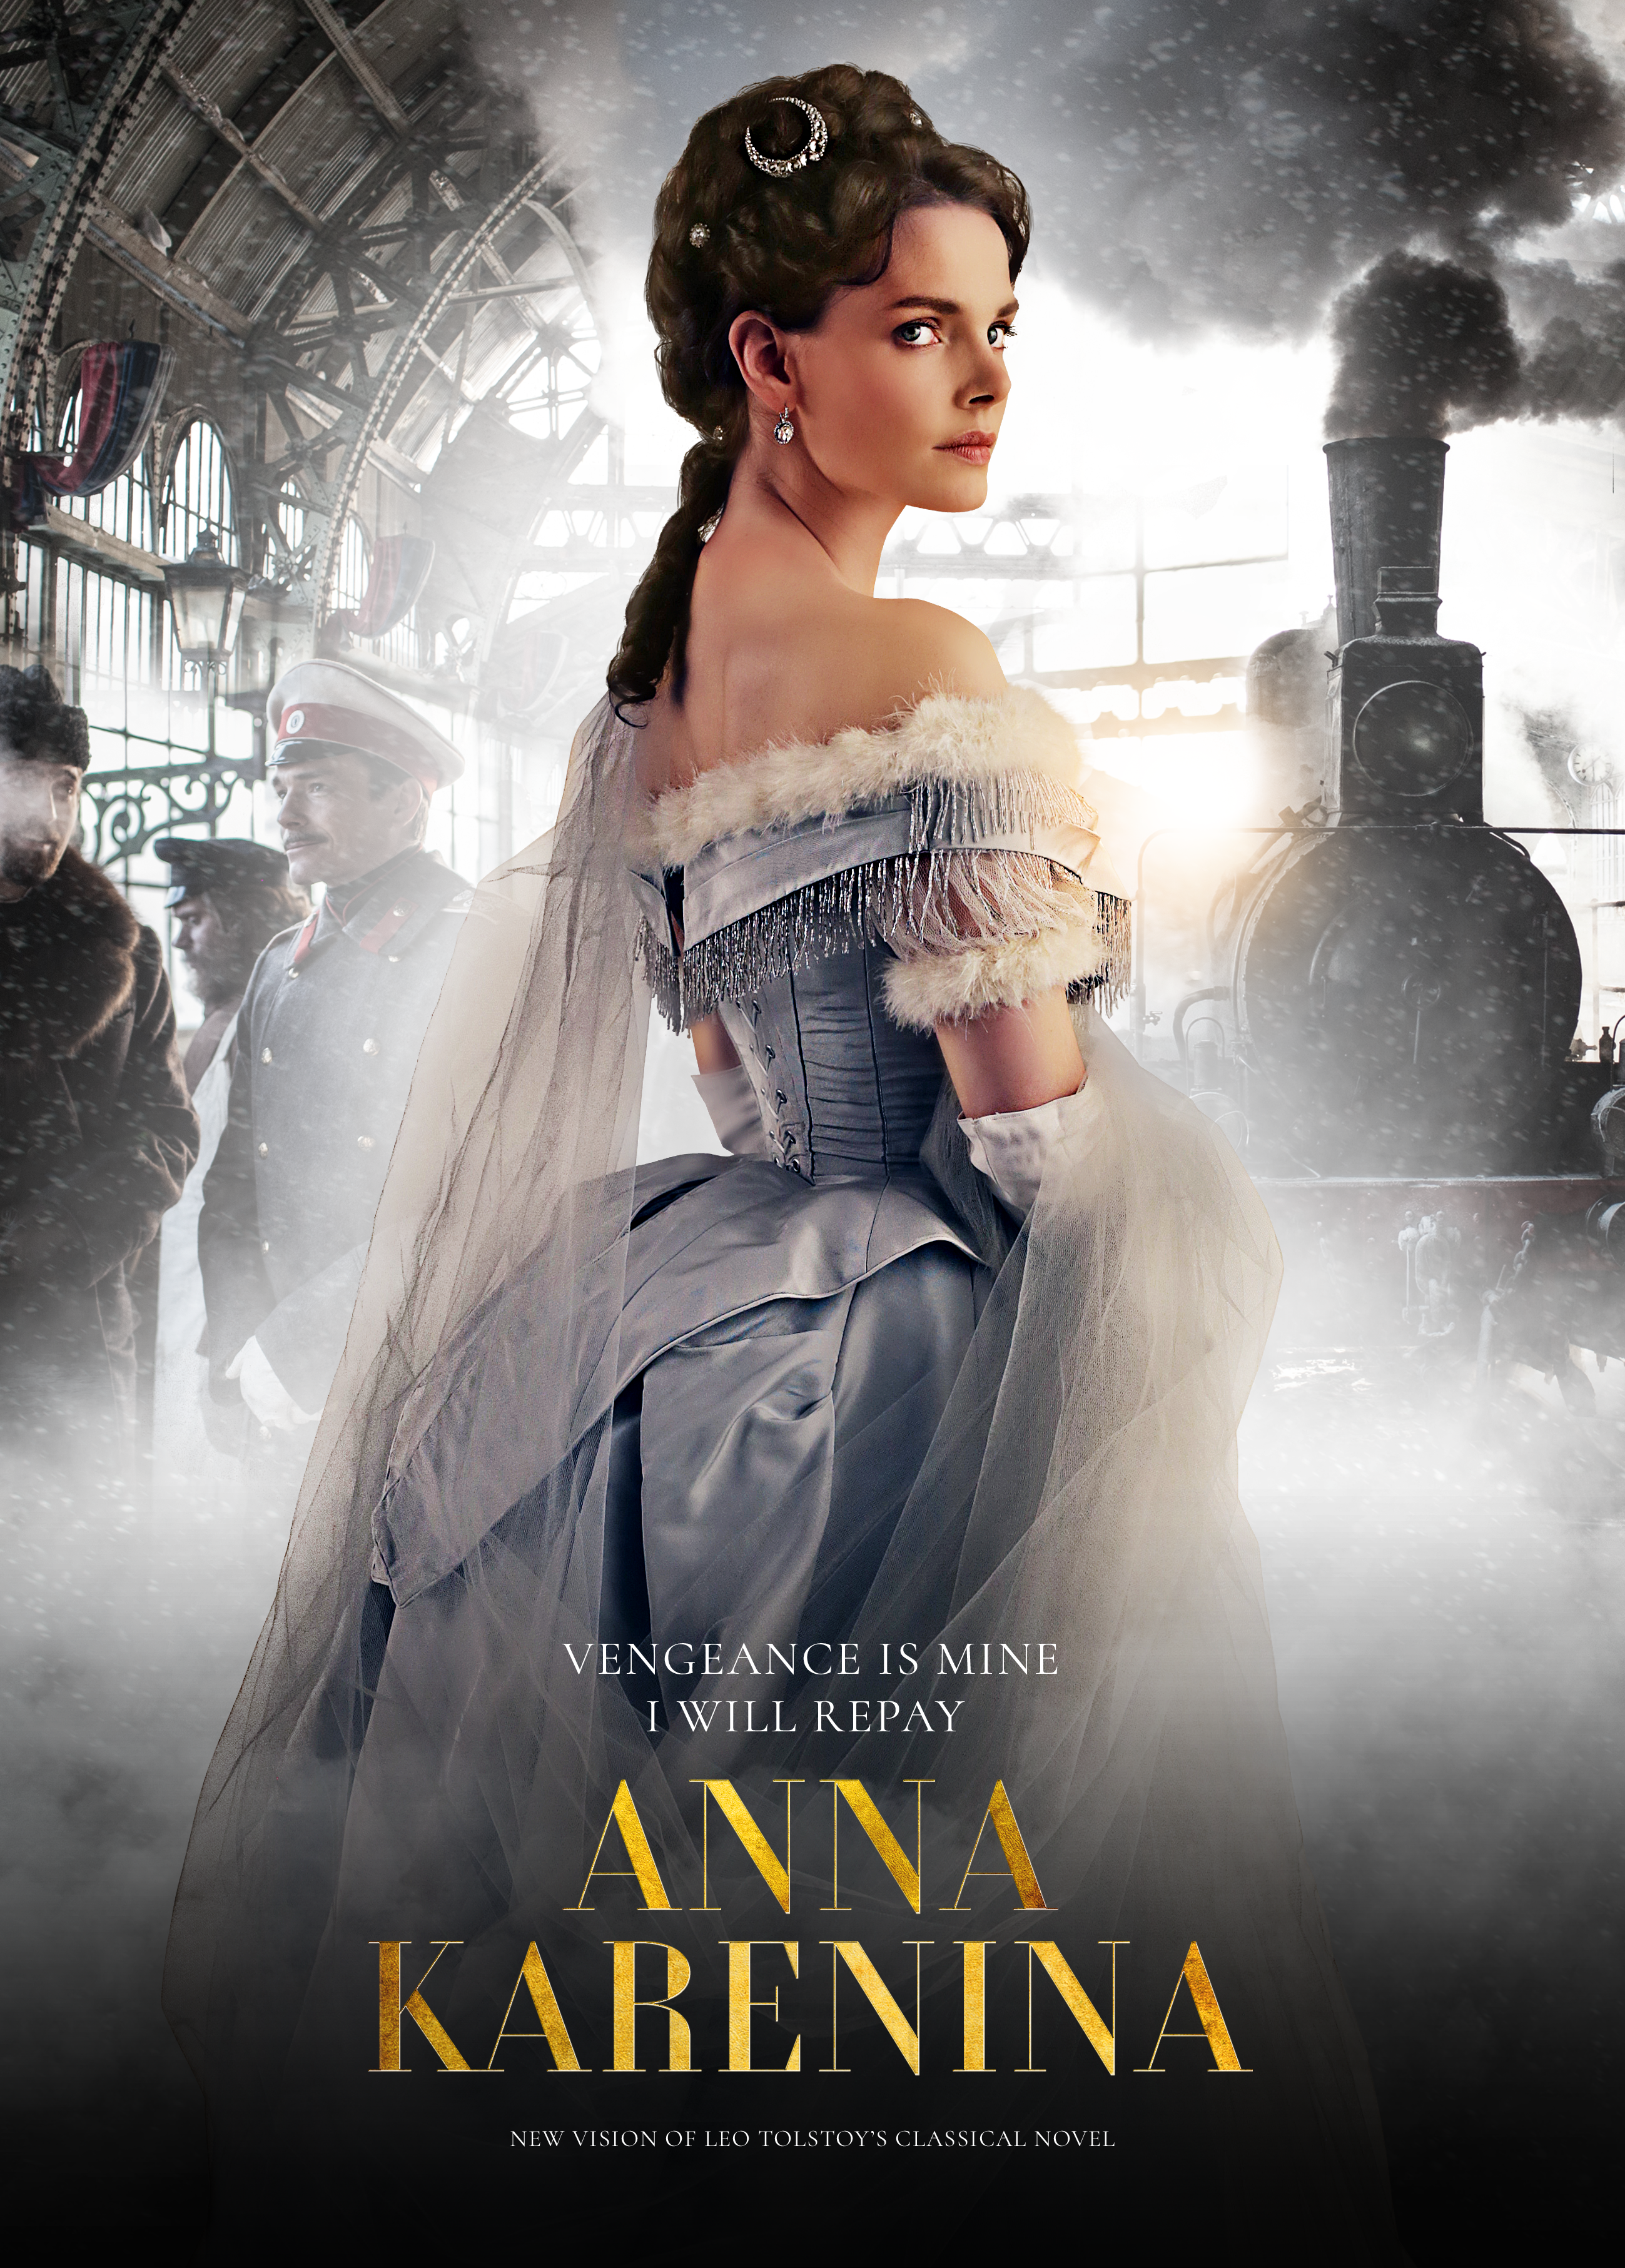 MEXICOS LARGEST CULTURE TV CHANNEL WILL SHOW ANNA KARENINA AND DEMONS 